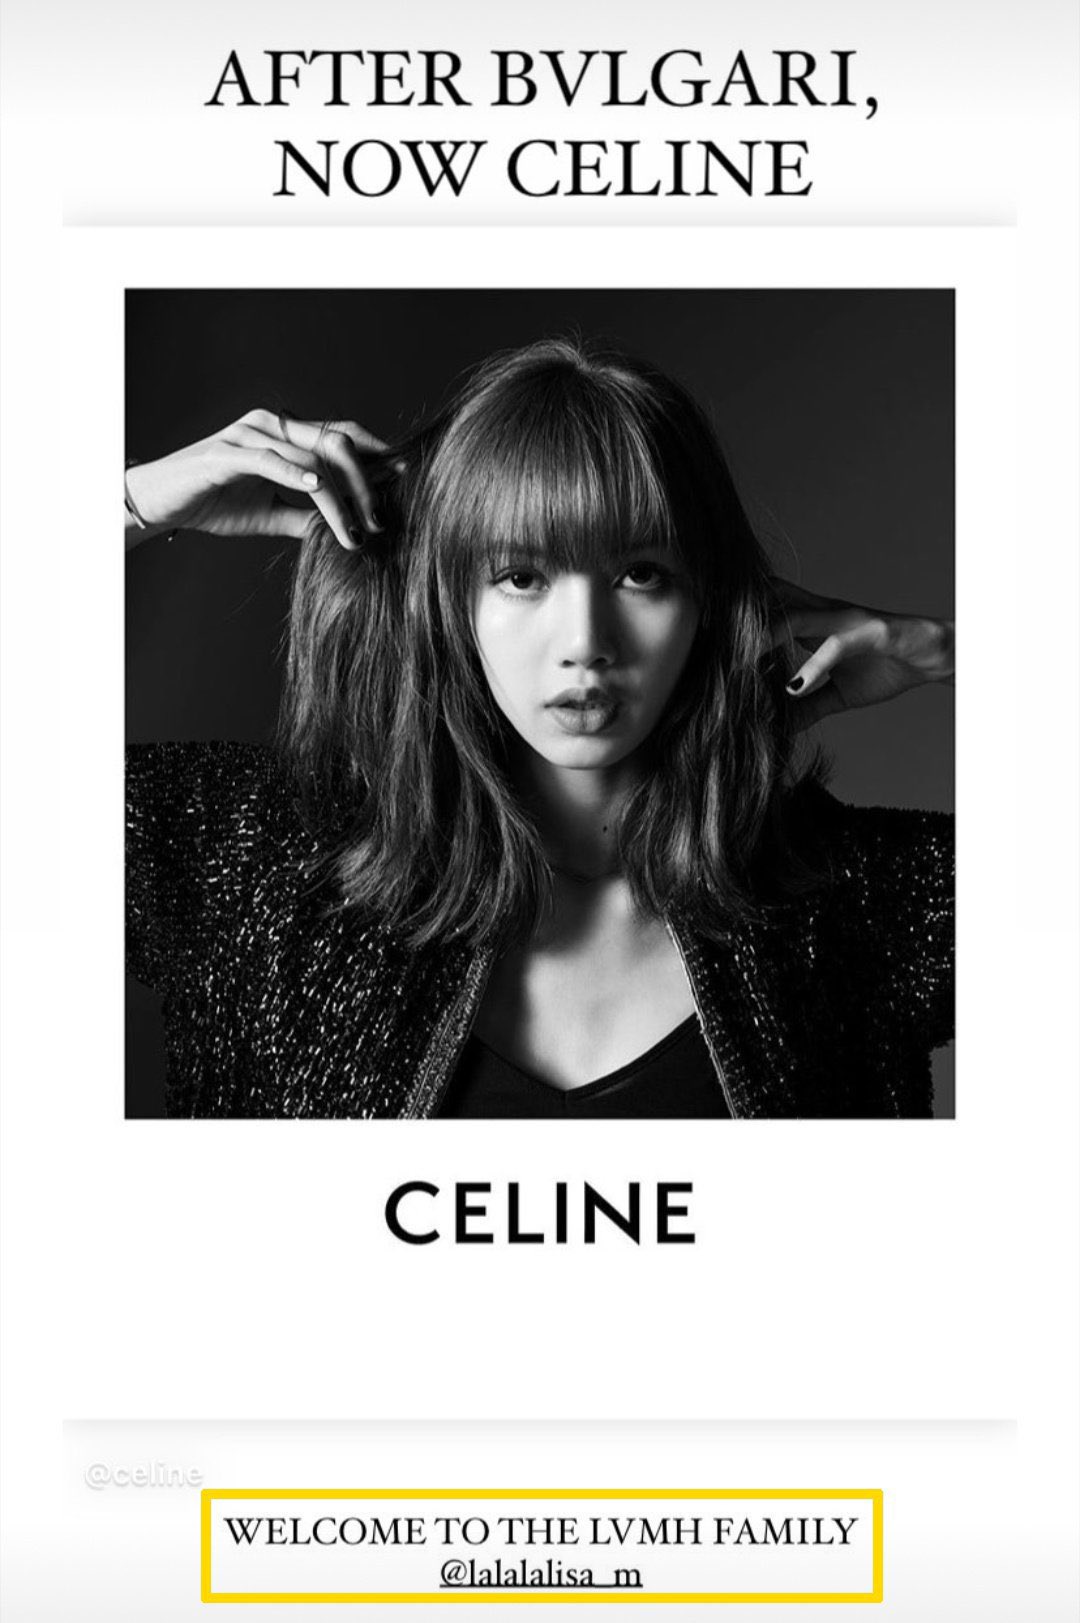 COOPER on X: Let's be real and clear, there is only one GLOBAL BRAND  AMBASSADOR for CELINE, and the rest will be called Celineboy and CelineGirl  .. LVMH Family welcomed #LISA after